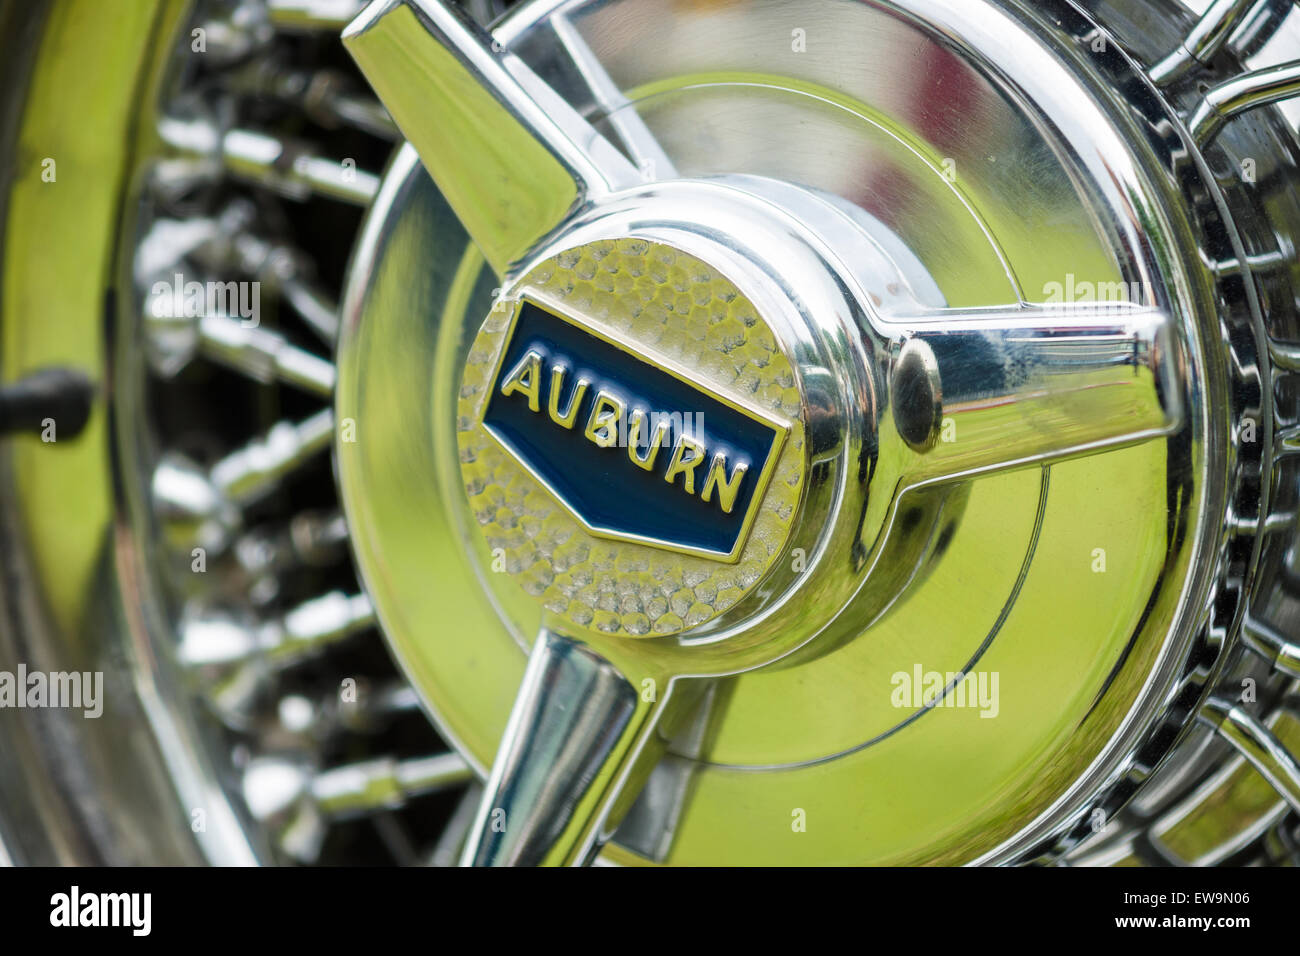 PAAREN IM GLIEN, GERMANY - MAY 23, 2015: Fragment of a wheel disk of a vintage car Auburn. The oldtimer show in MAFZ. Stock Photo